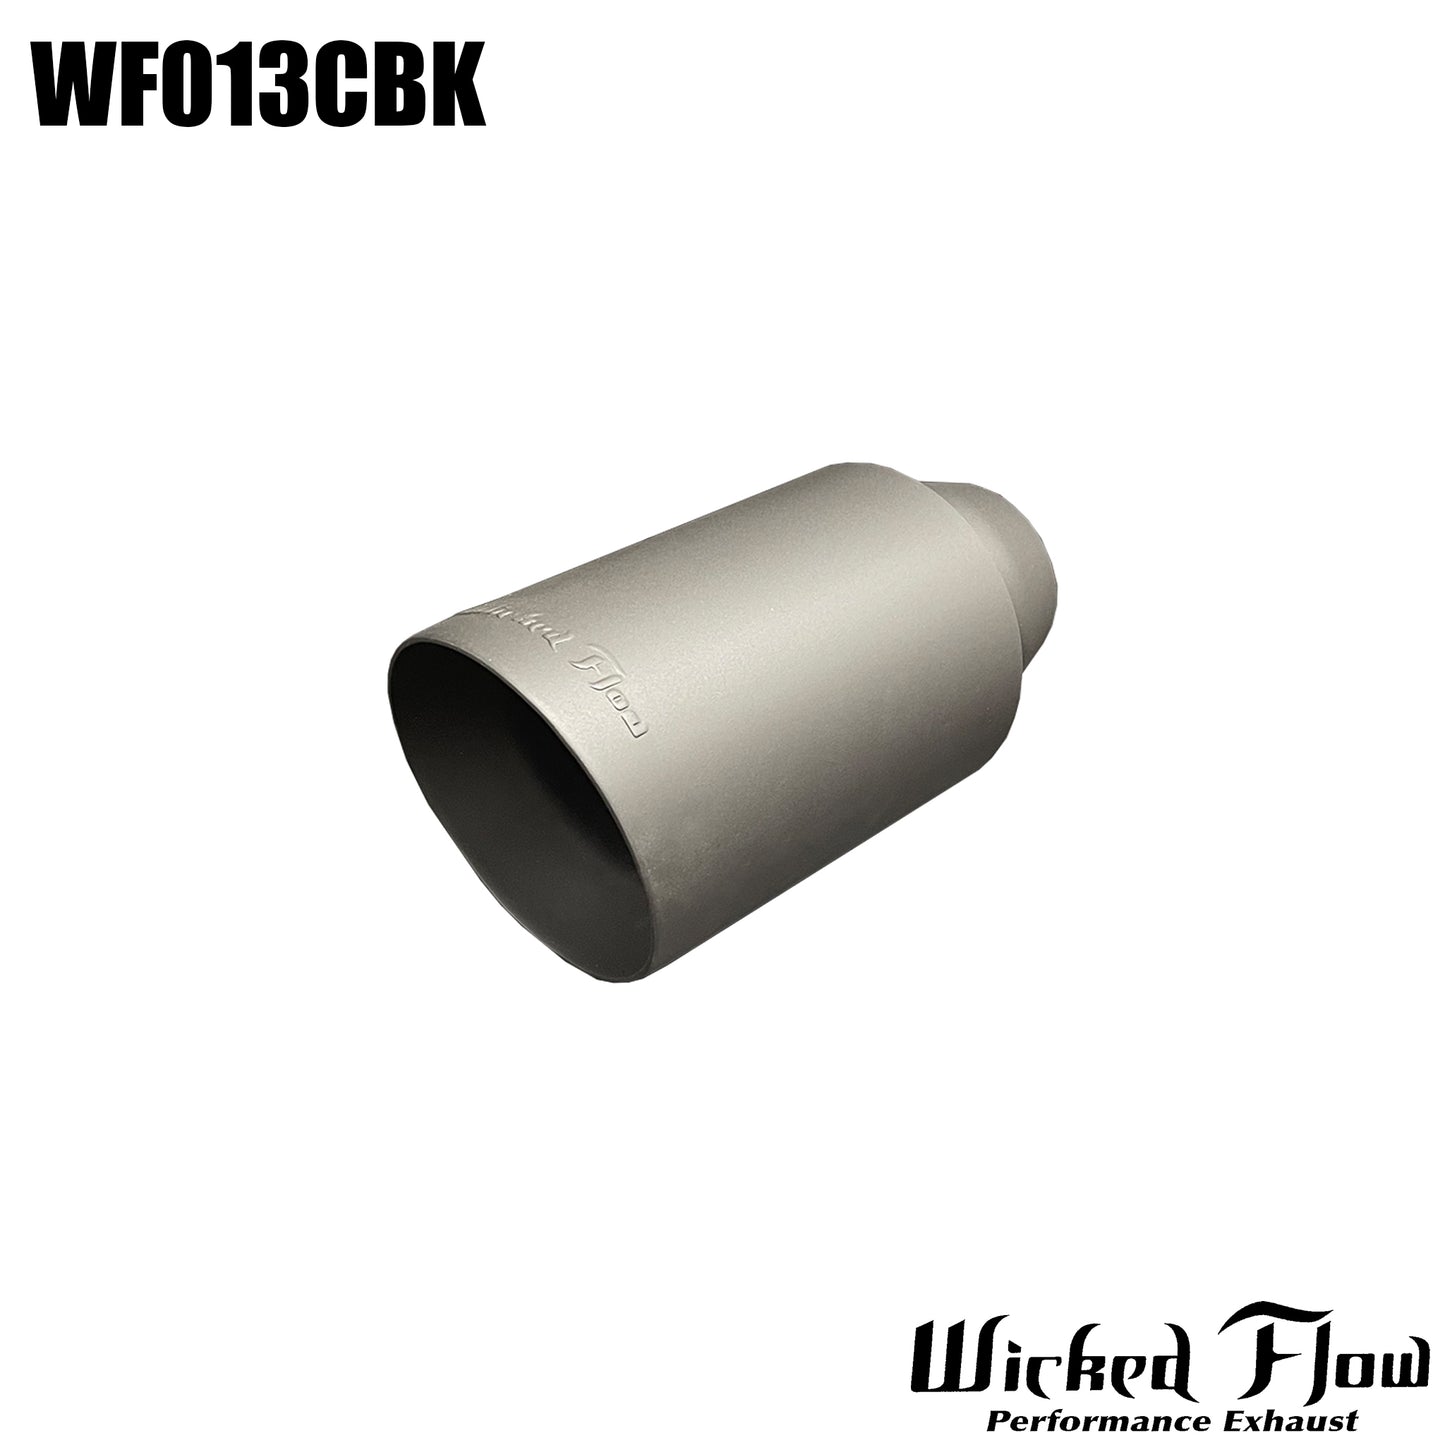 WF013CBK - EXHAUST TIP - 2.25" Inlet 8" Length POWDER COATED